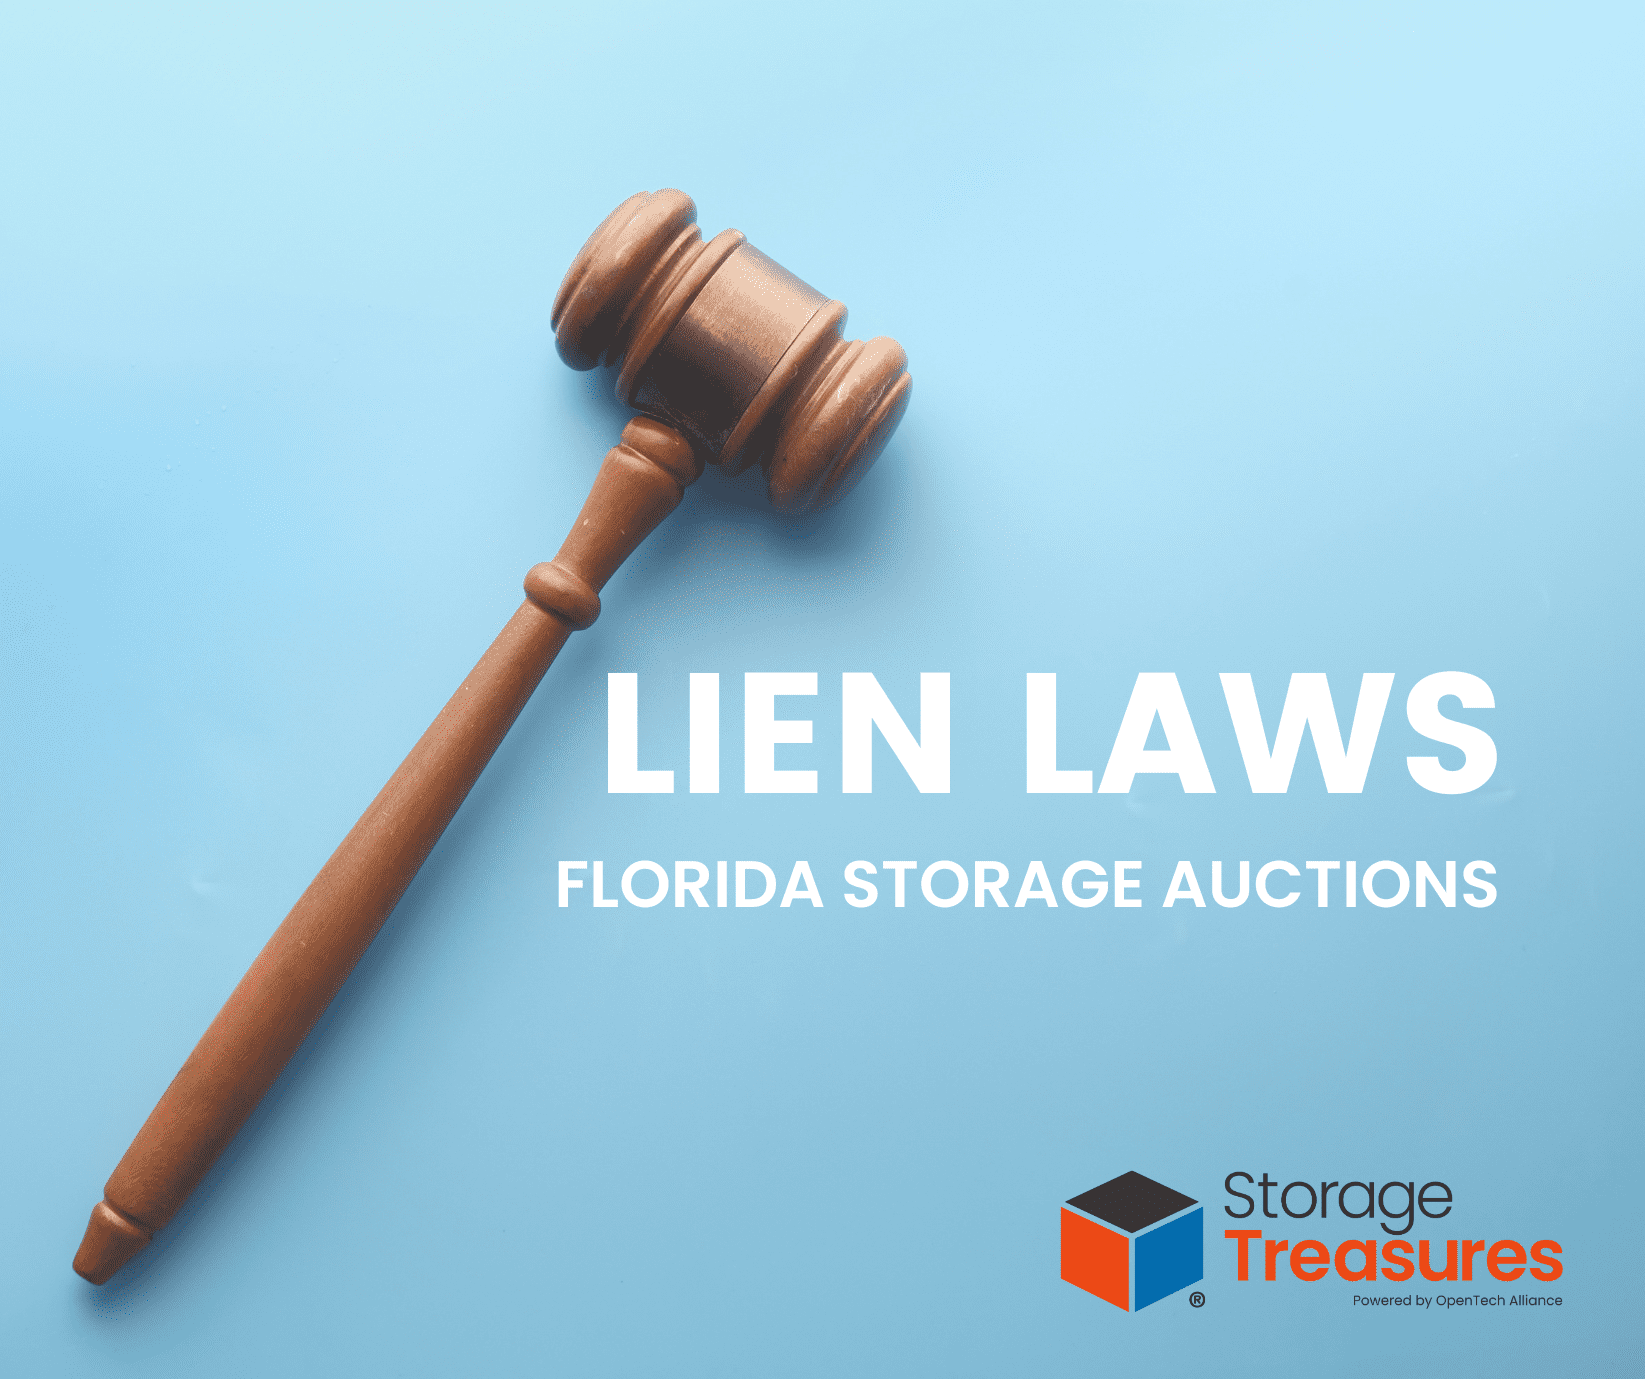 Florida Storage Auctions: Stay Updated with the Latest Lien Law Developments